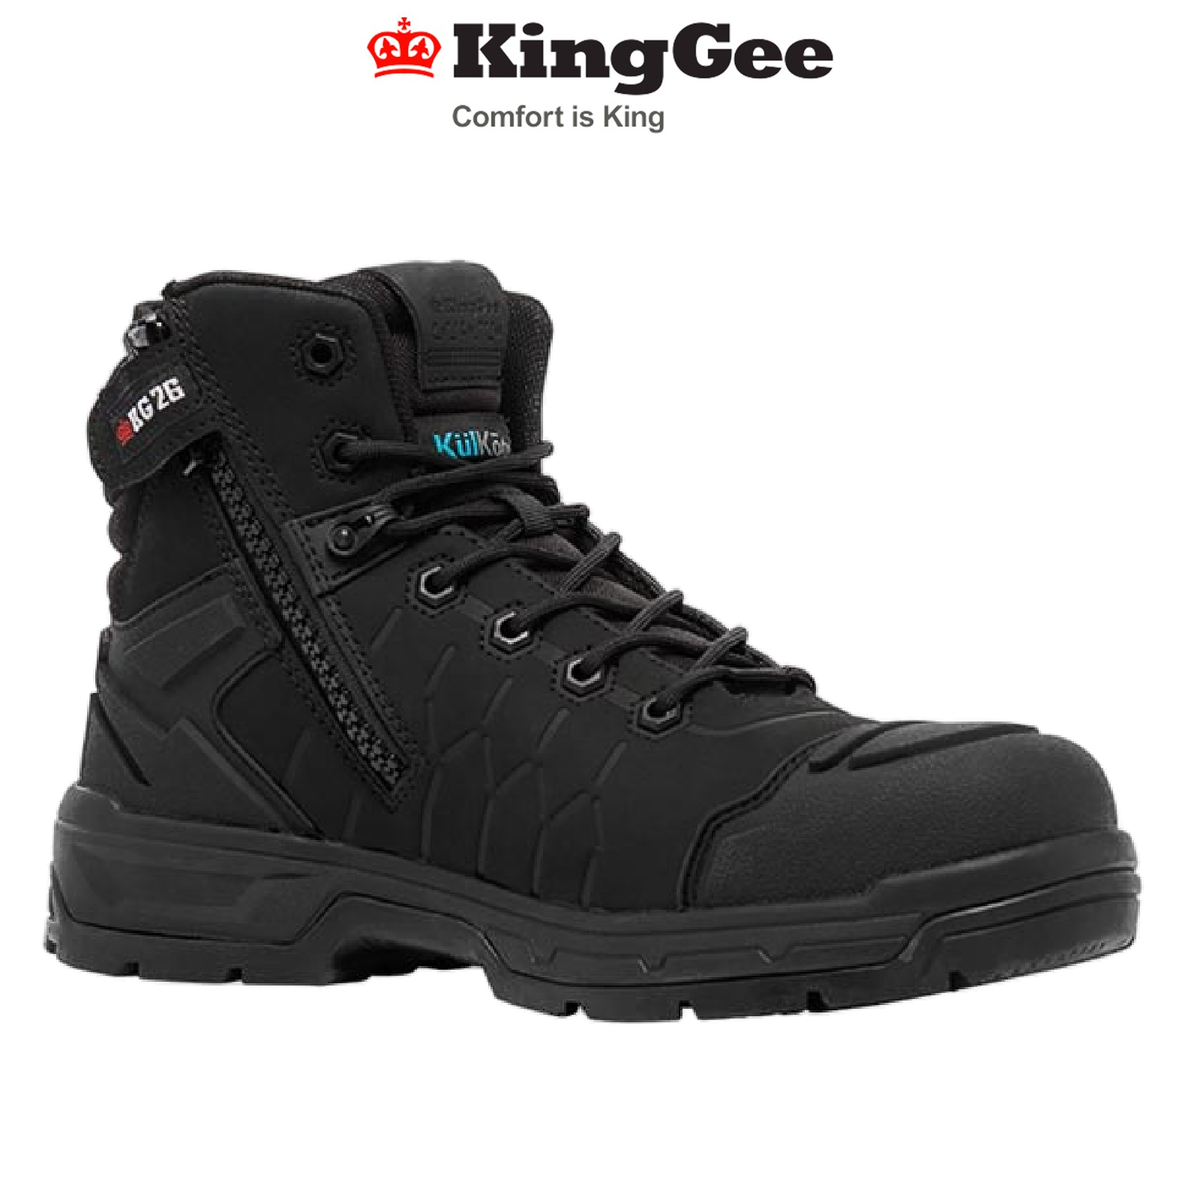 KingGee Mens Quantum Boot Lightweight Work Safety Boots Premium Quality K27145